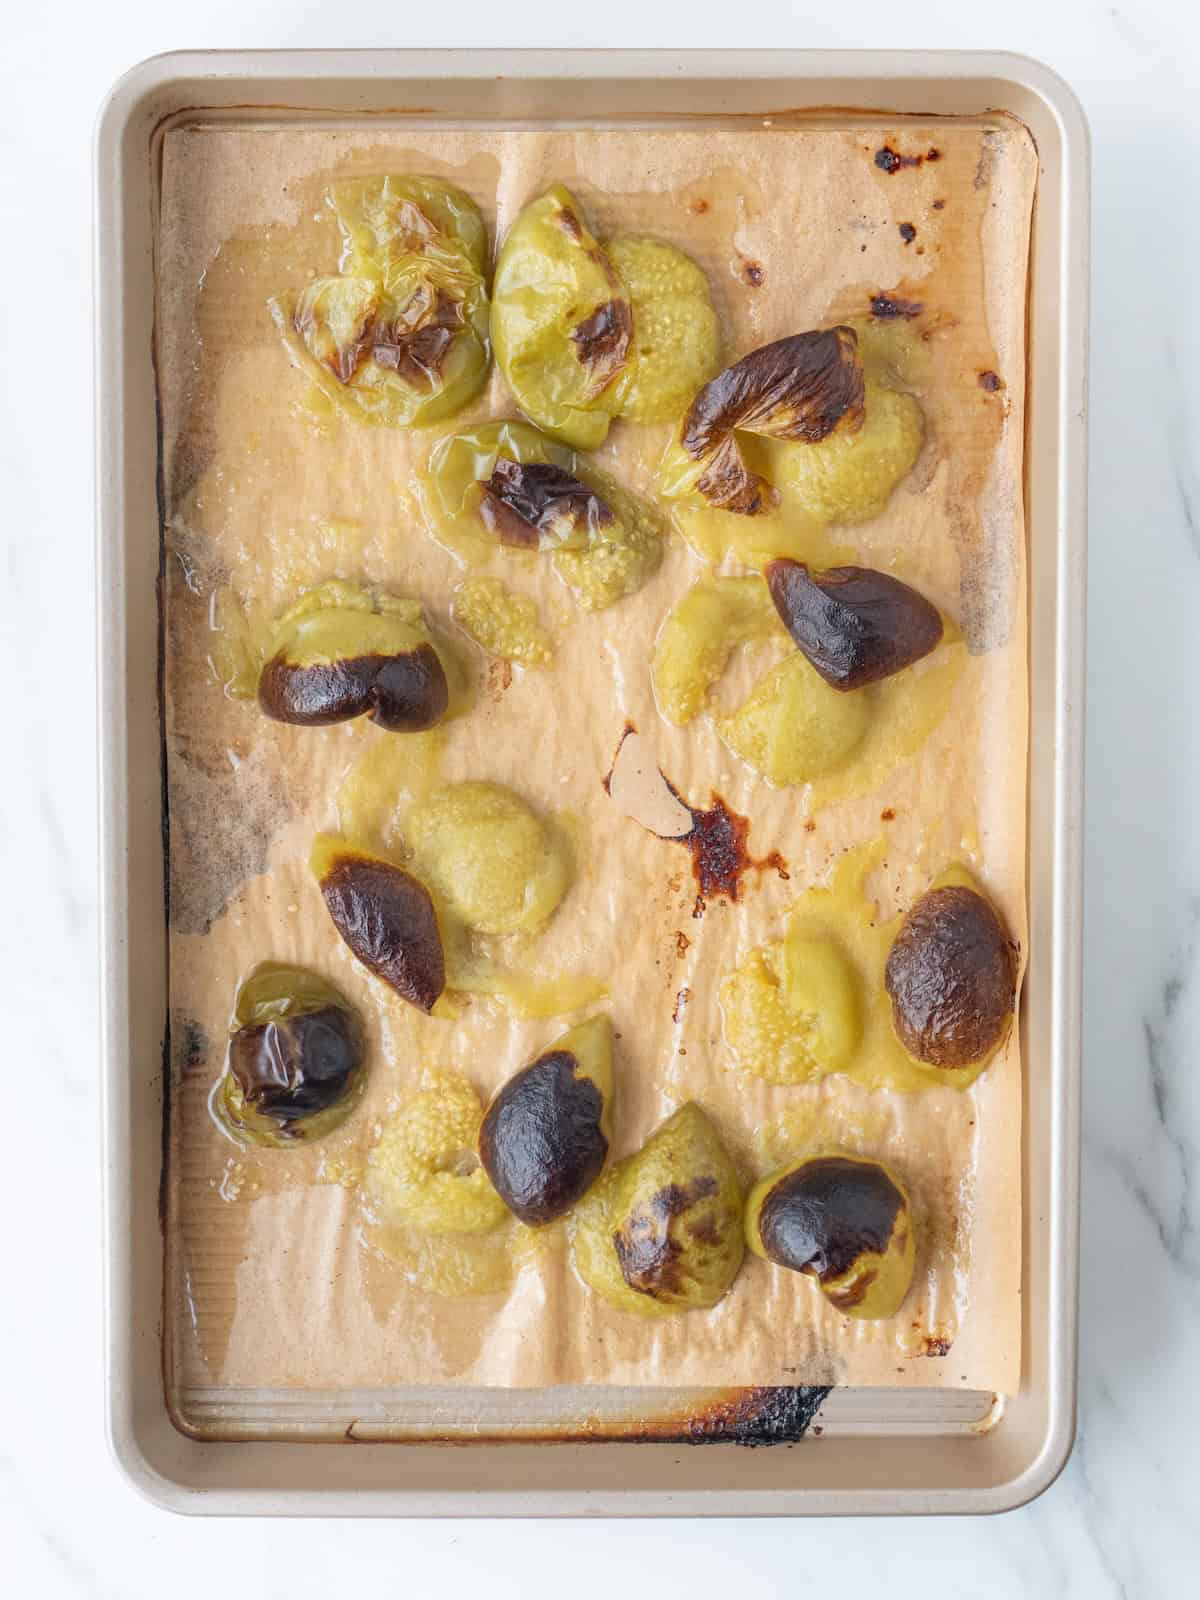 A sheet pan lined with parchment paper, with roasted tomatillos.